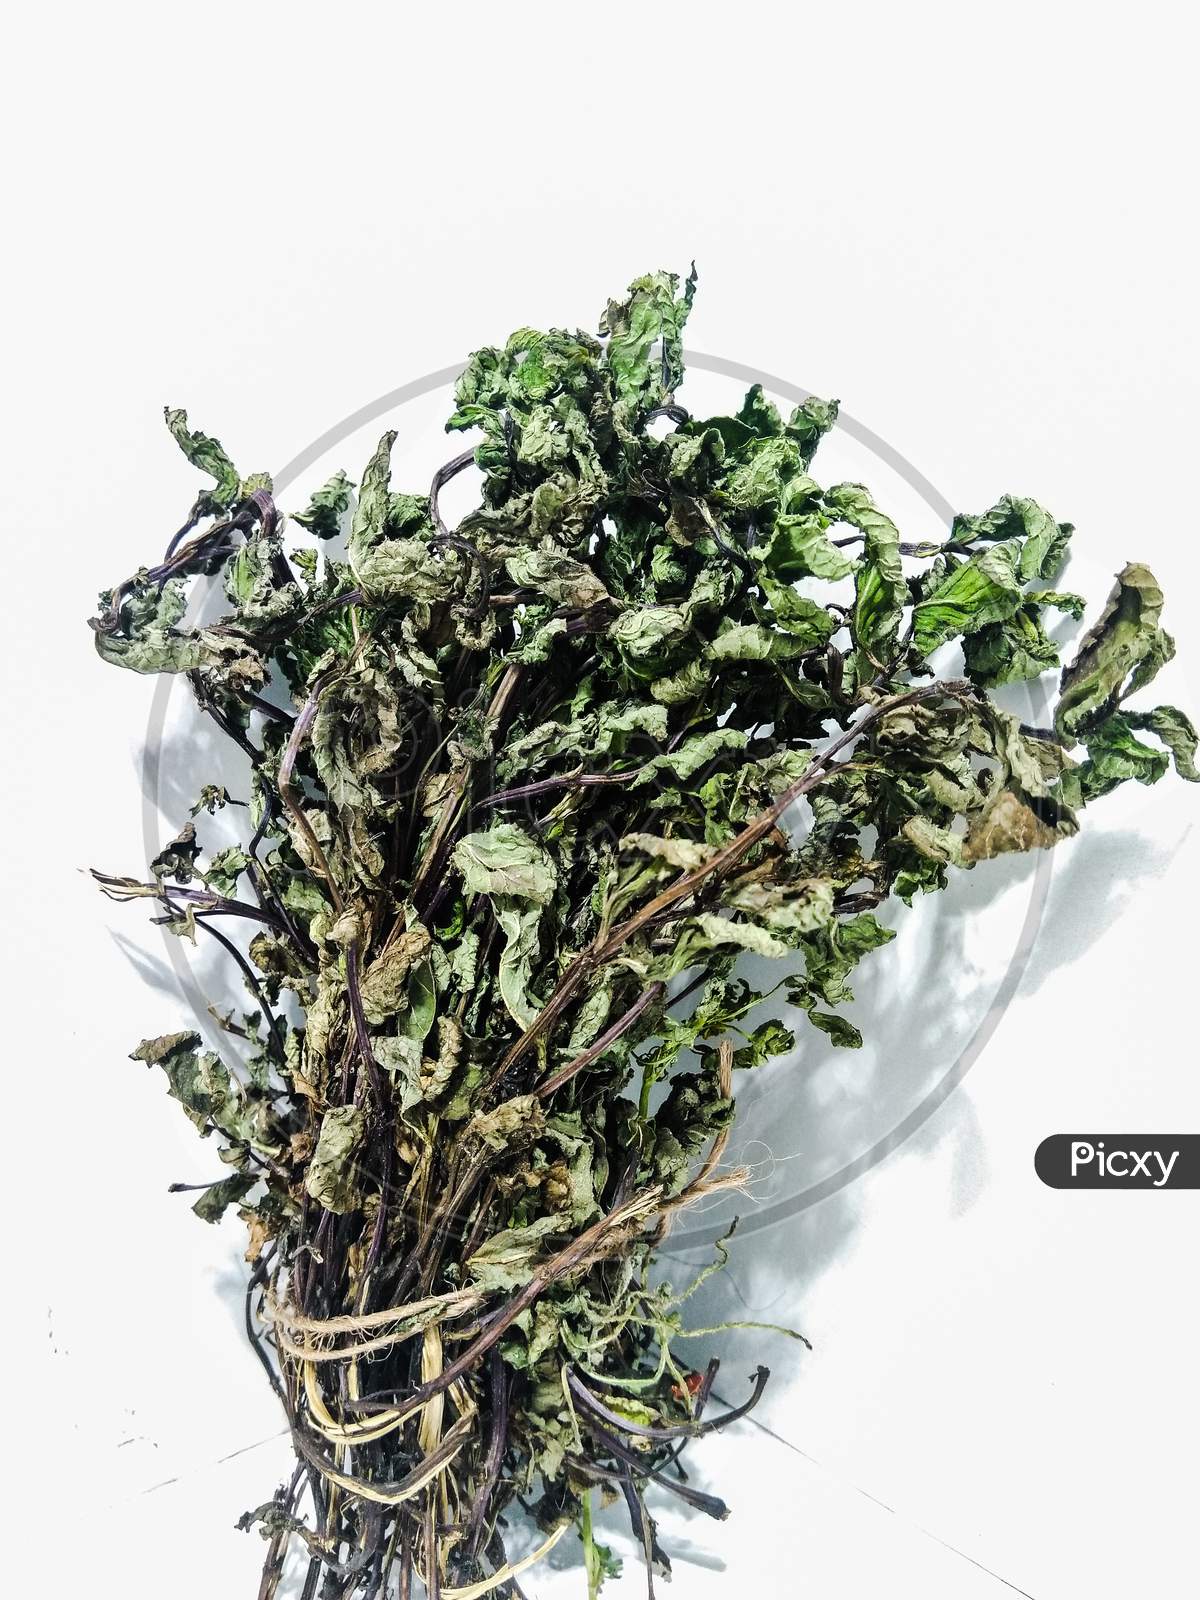 A picture of dry mint leafs